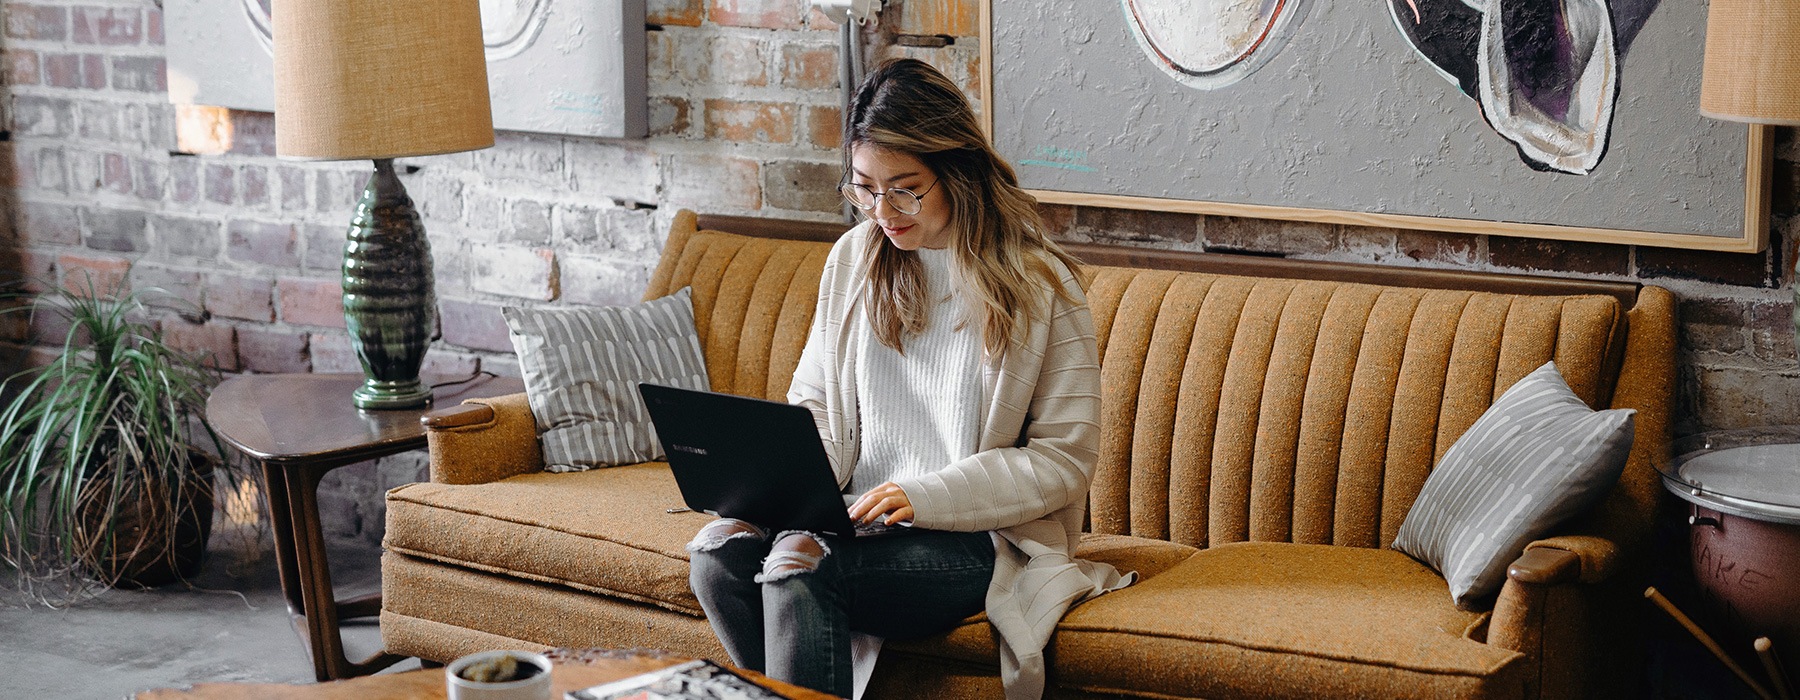 lifestyle image of a young woman sitting on a couch with her laptop